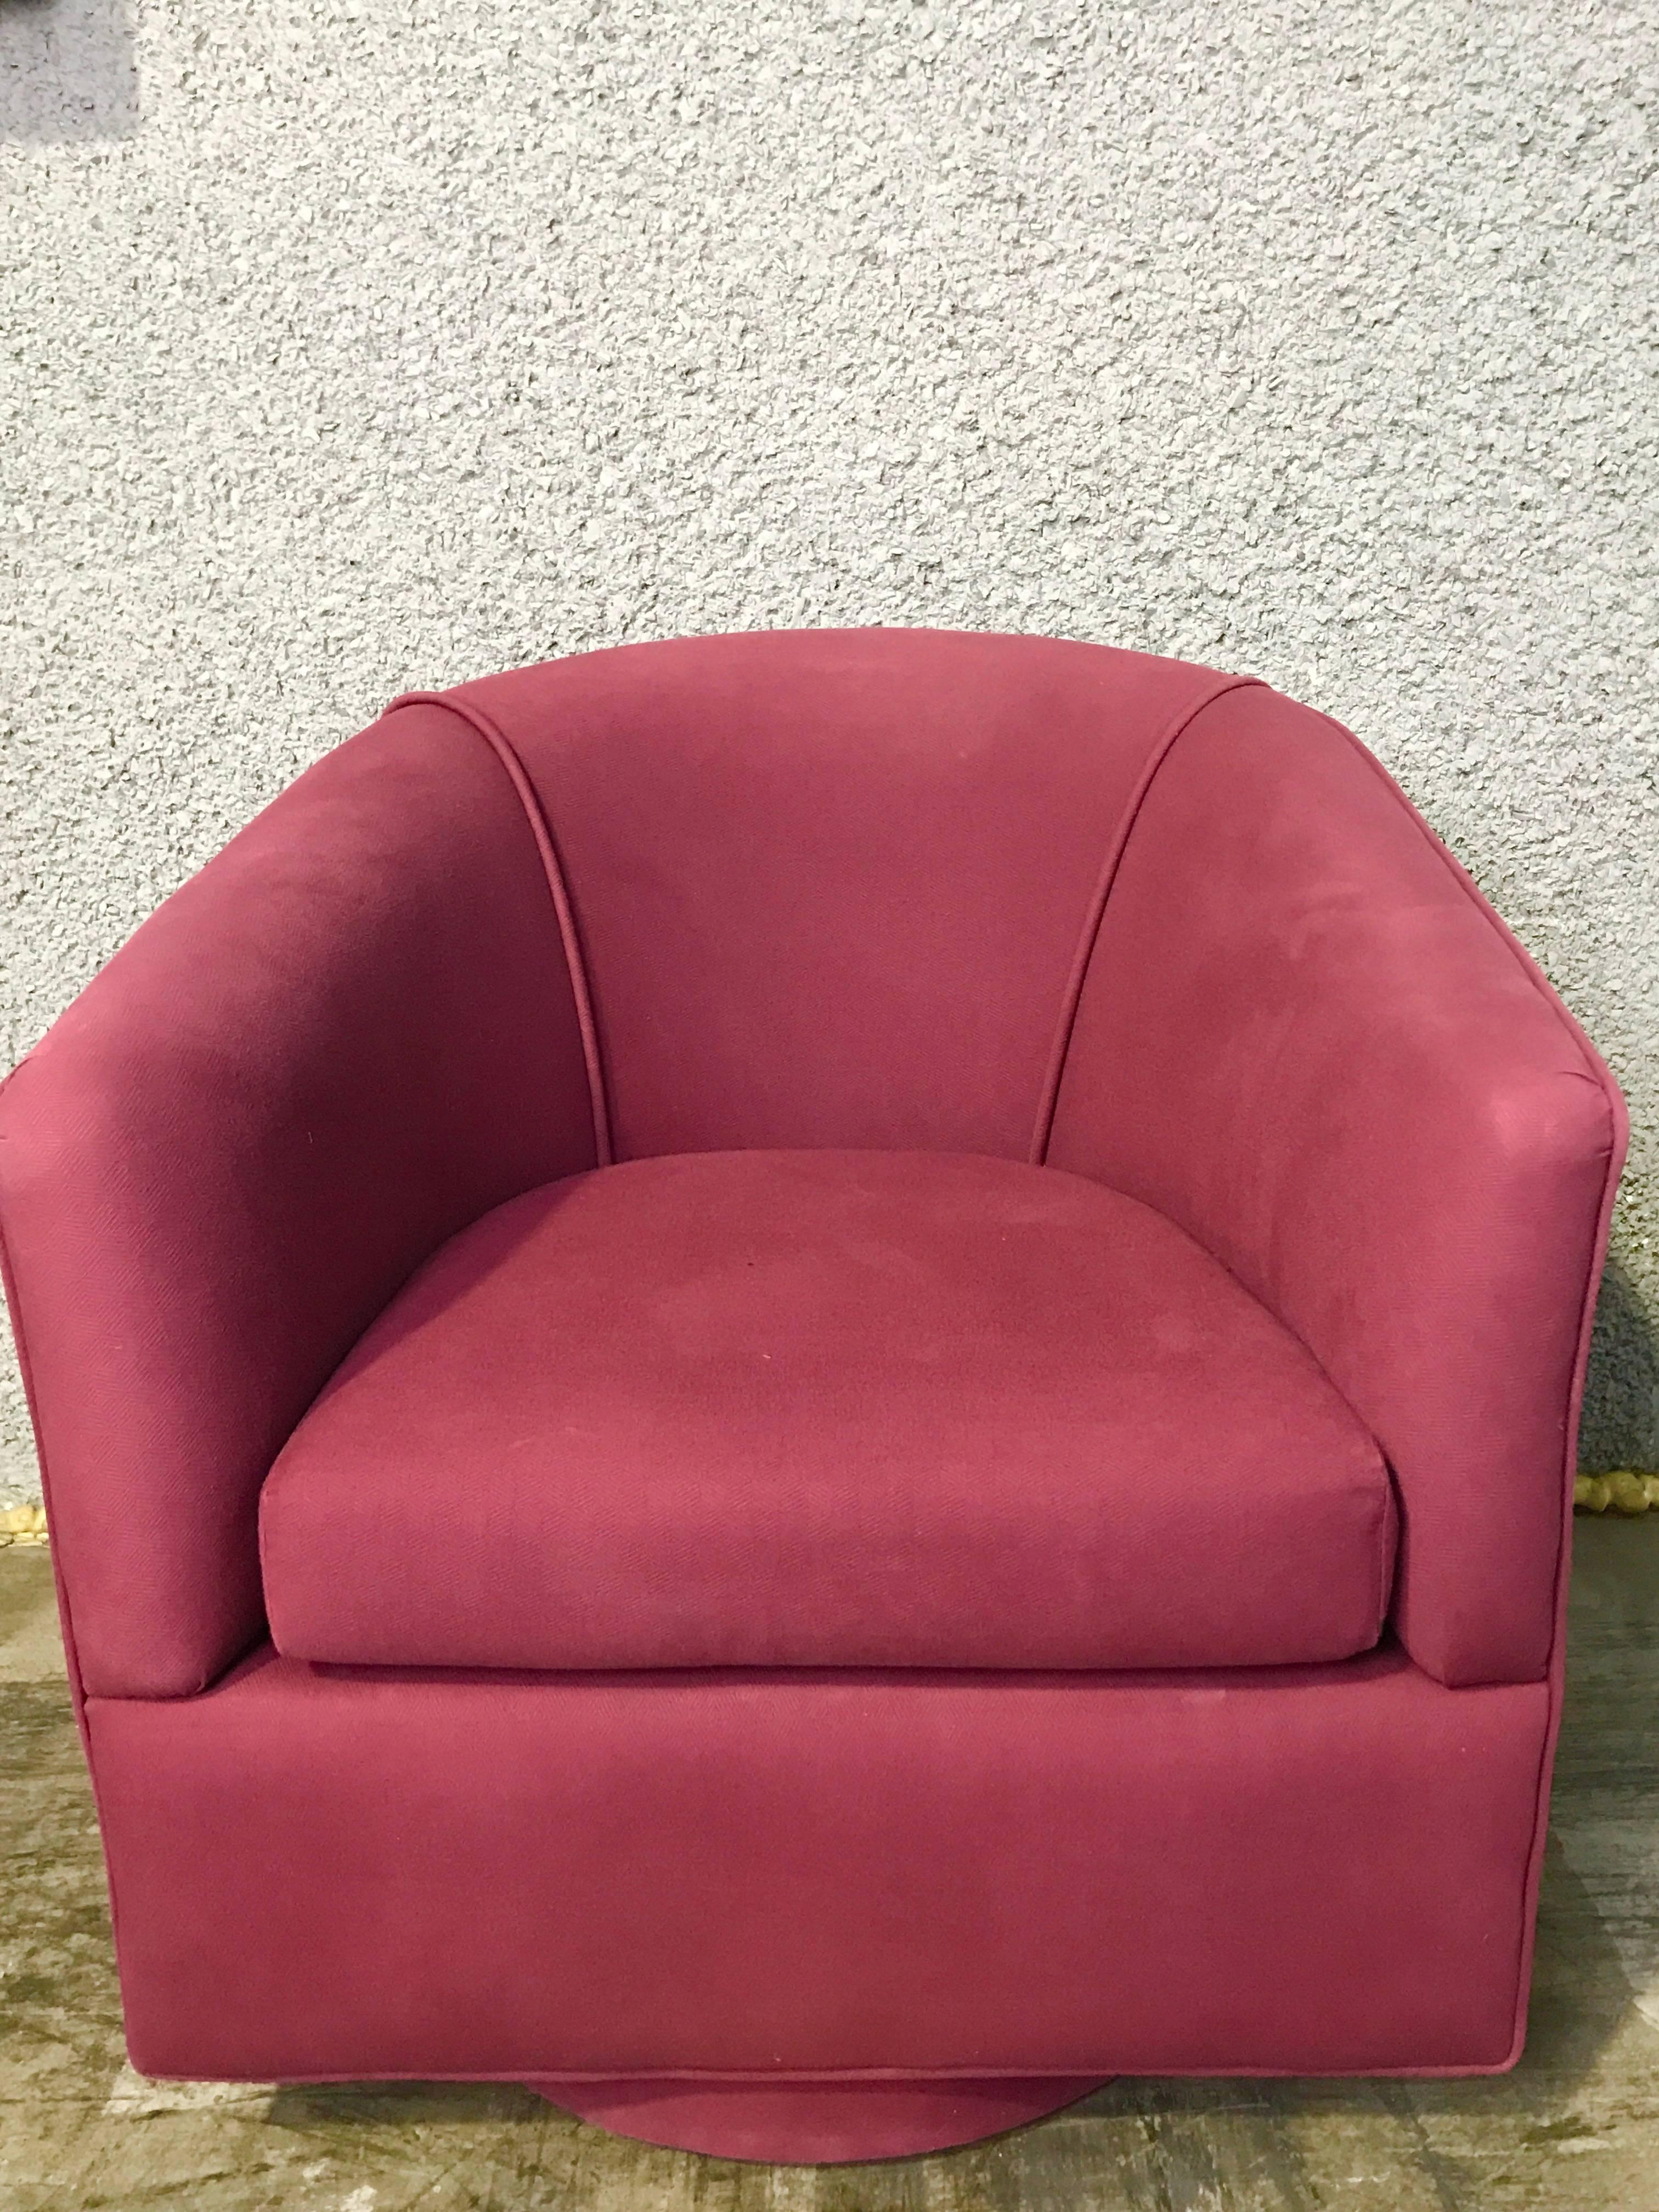 Late 20th Century Pair of Milo Baughman Style Swivel Chairs, Ready for Upholstery